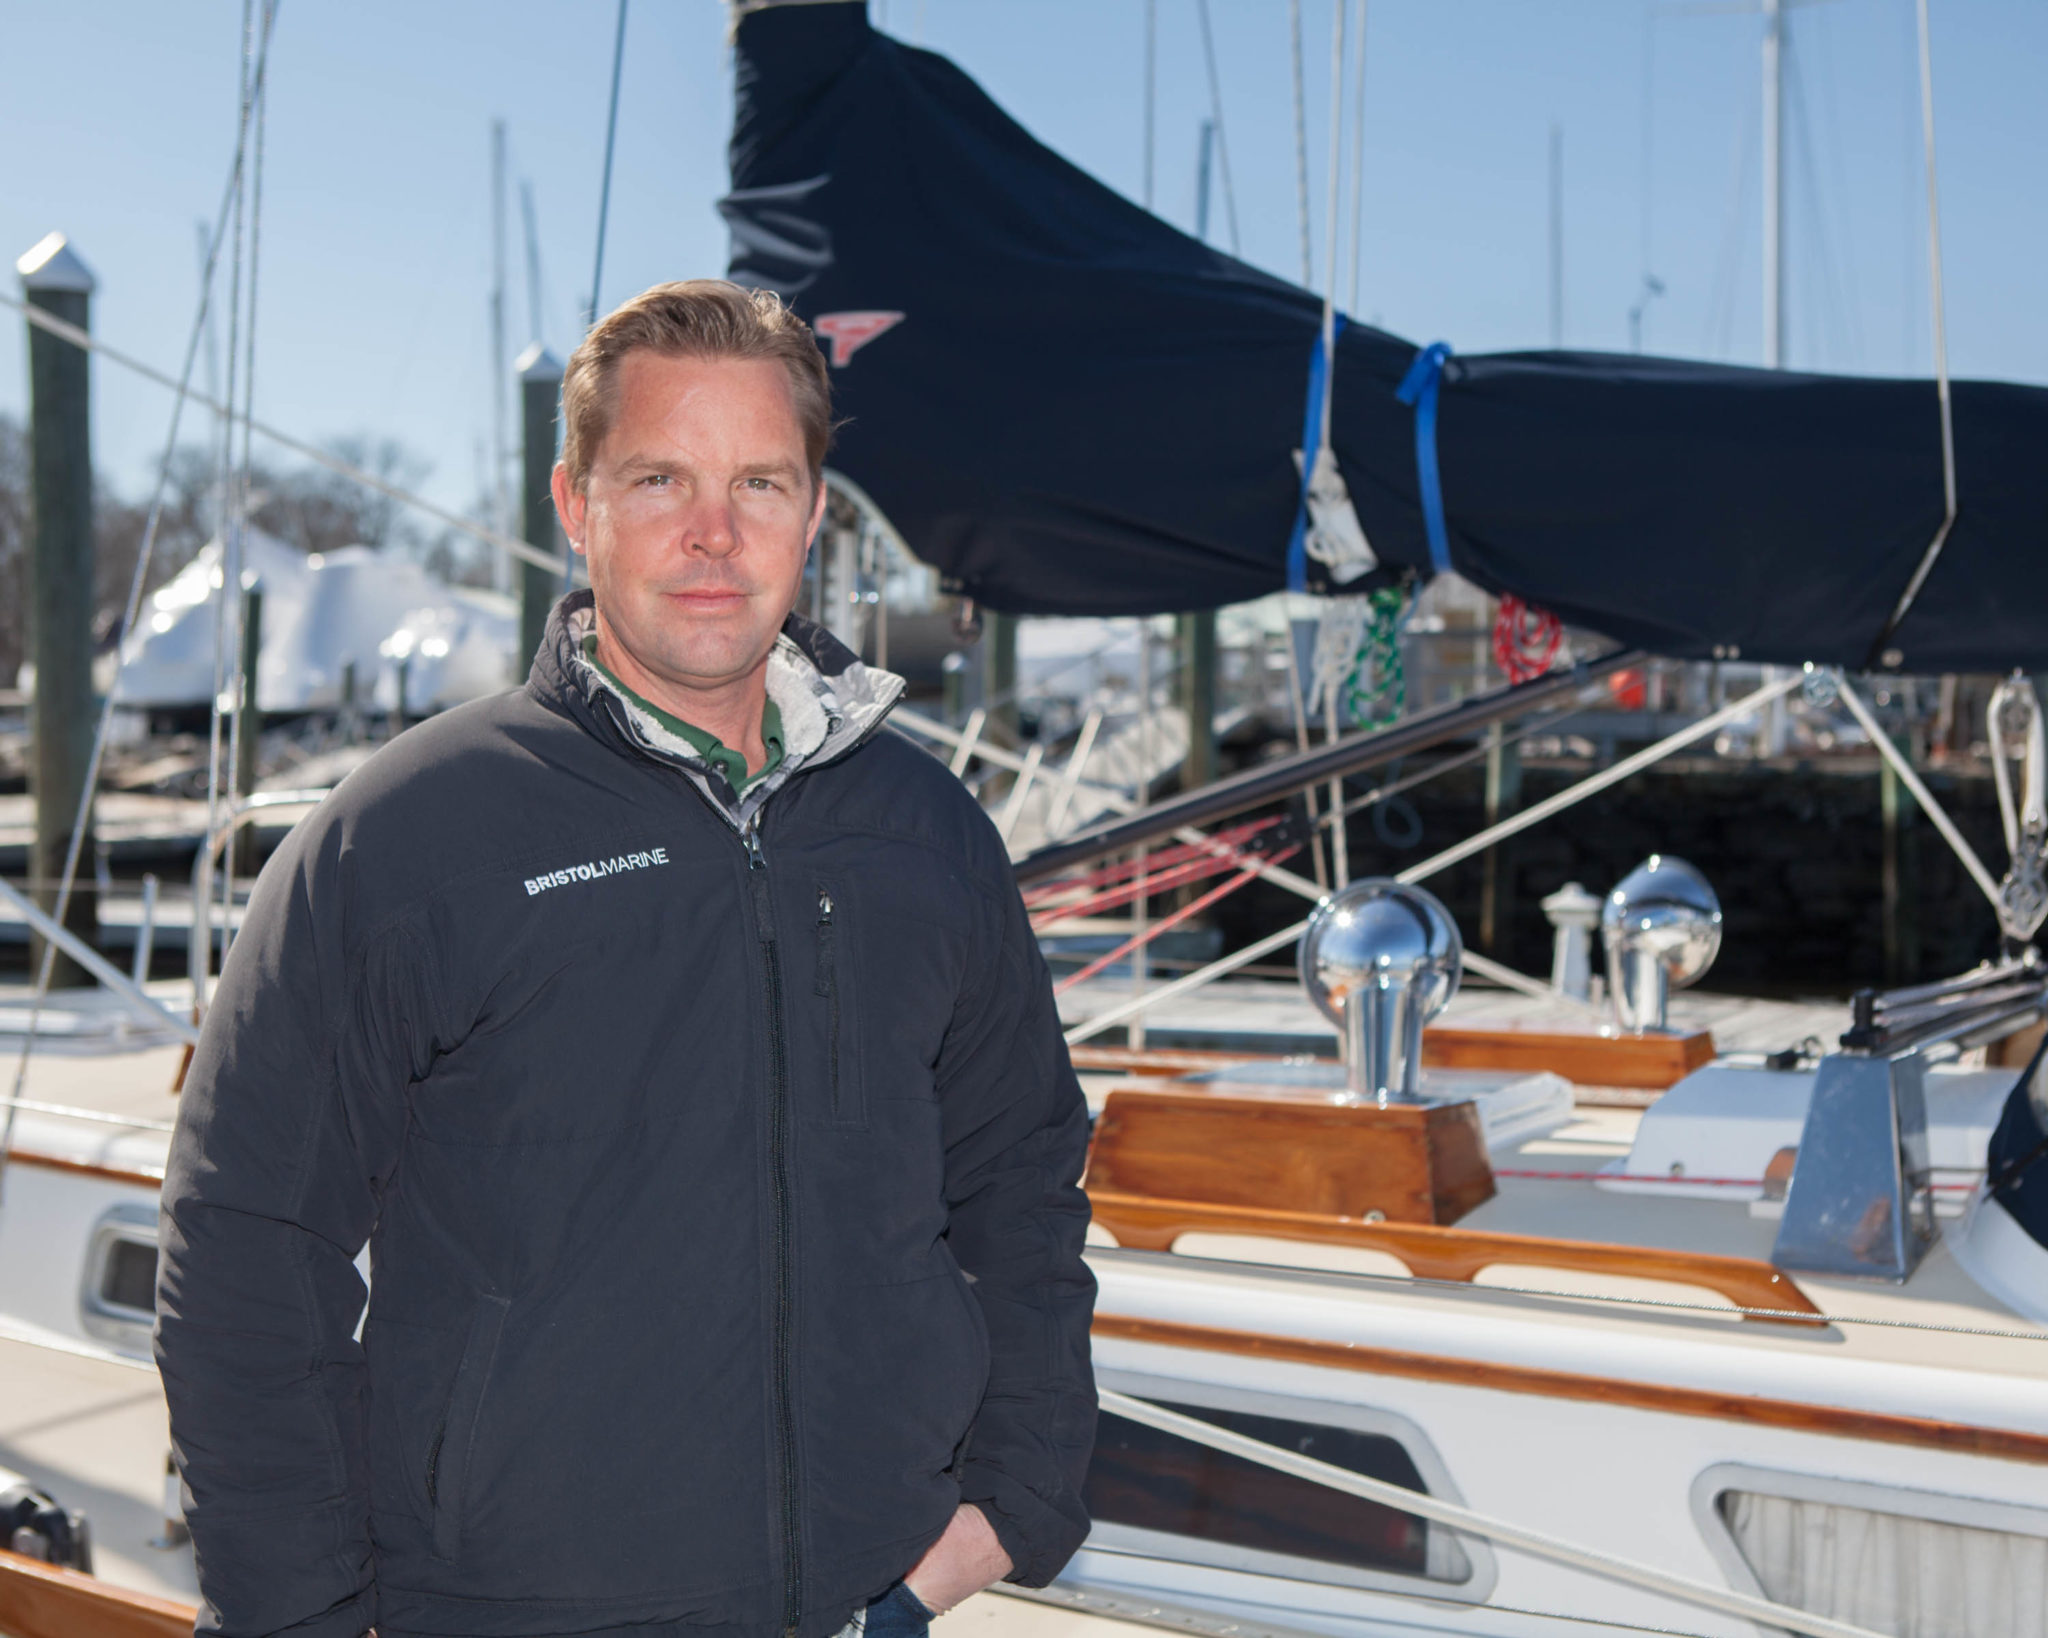 BRISTOL MARINE has acquired Boothbay Harbor Shipyard. Above, Andy Tyska, president and owner of Bristol Marine. / PBN FILE PHOTO/TRACY JENKINS